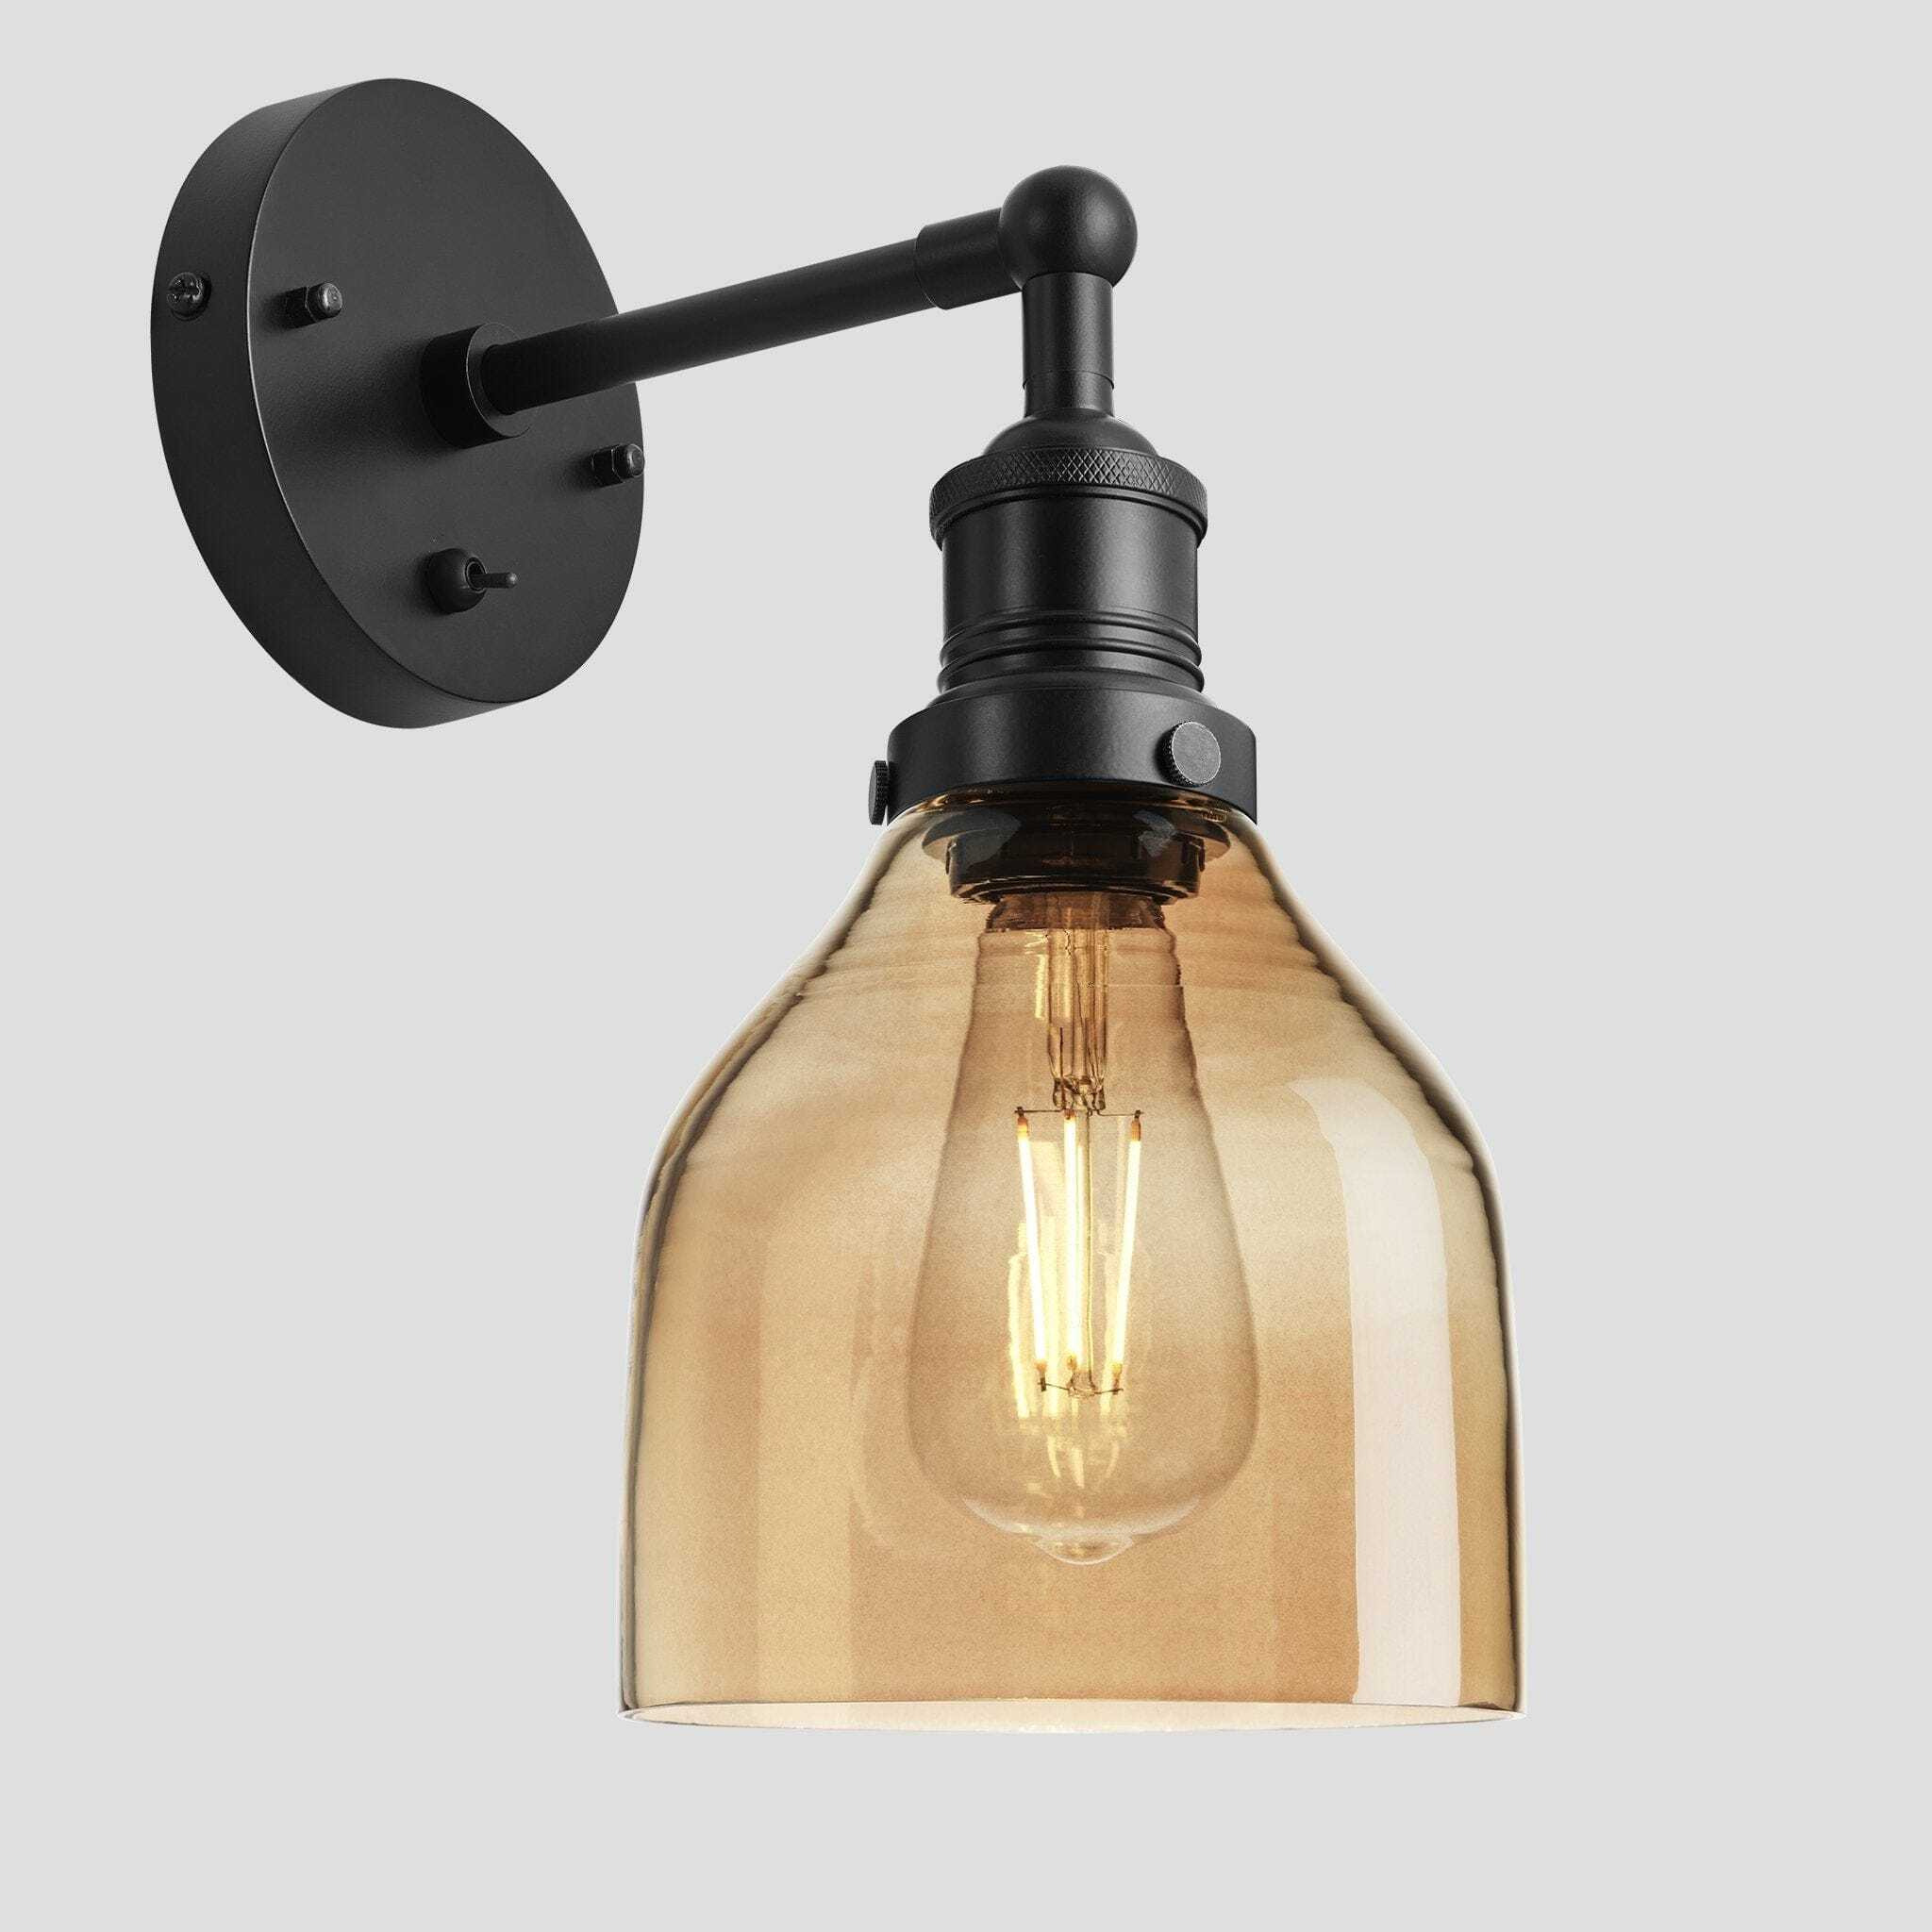 Brooklyn Tinted Glass Cone Wall Light - 6 Inch - Amber